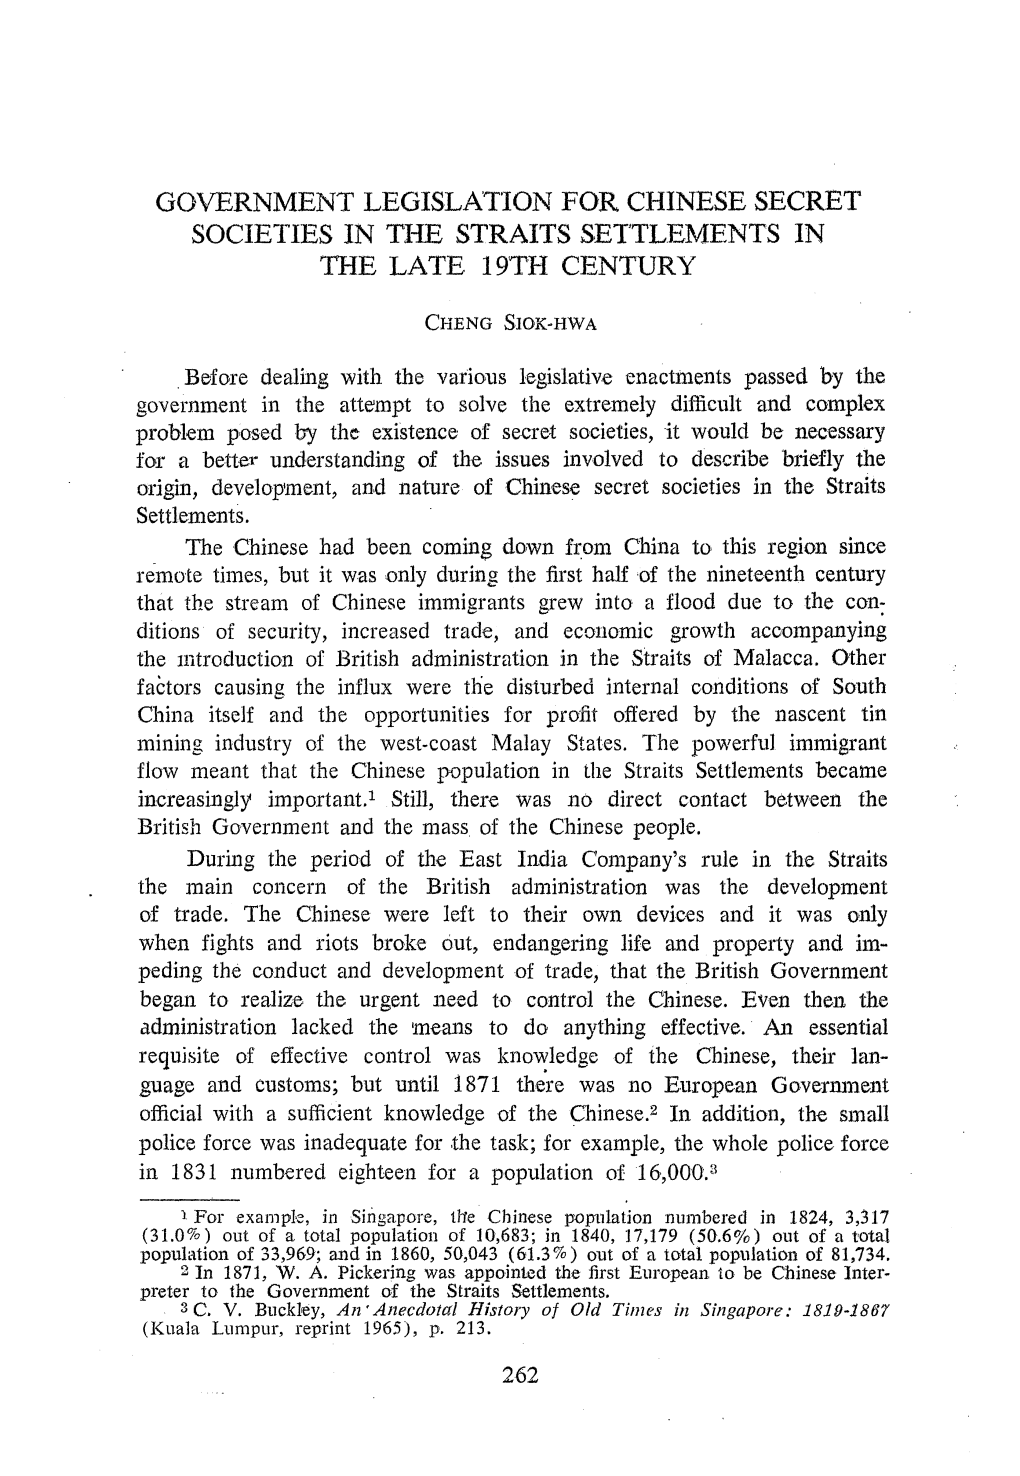 Government Legislation for Chinese Secret Societies in the Straits Settlements in the Late 19Th Century